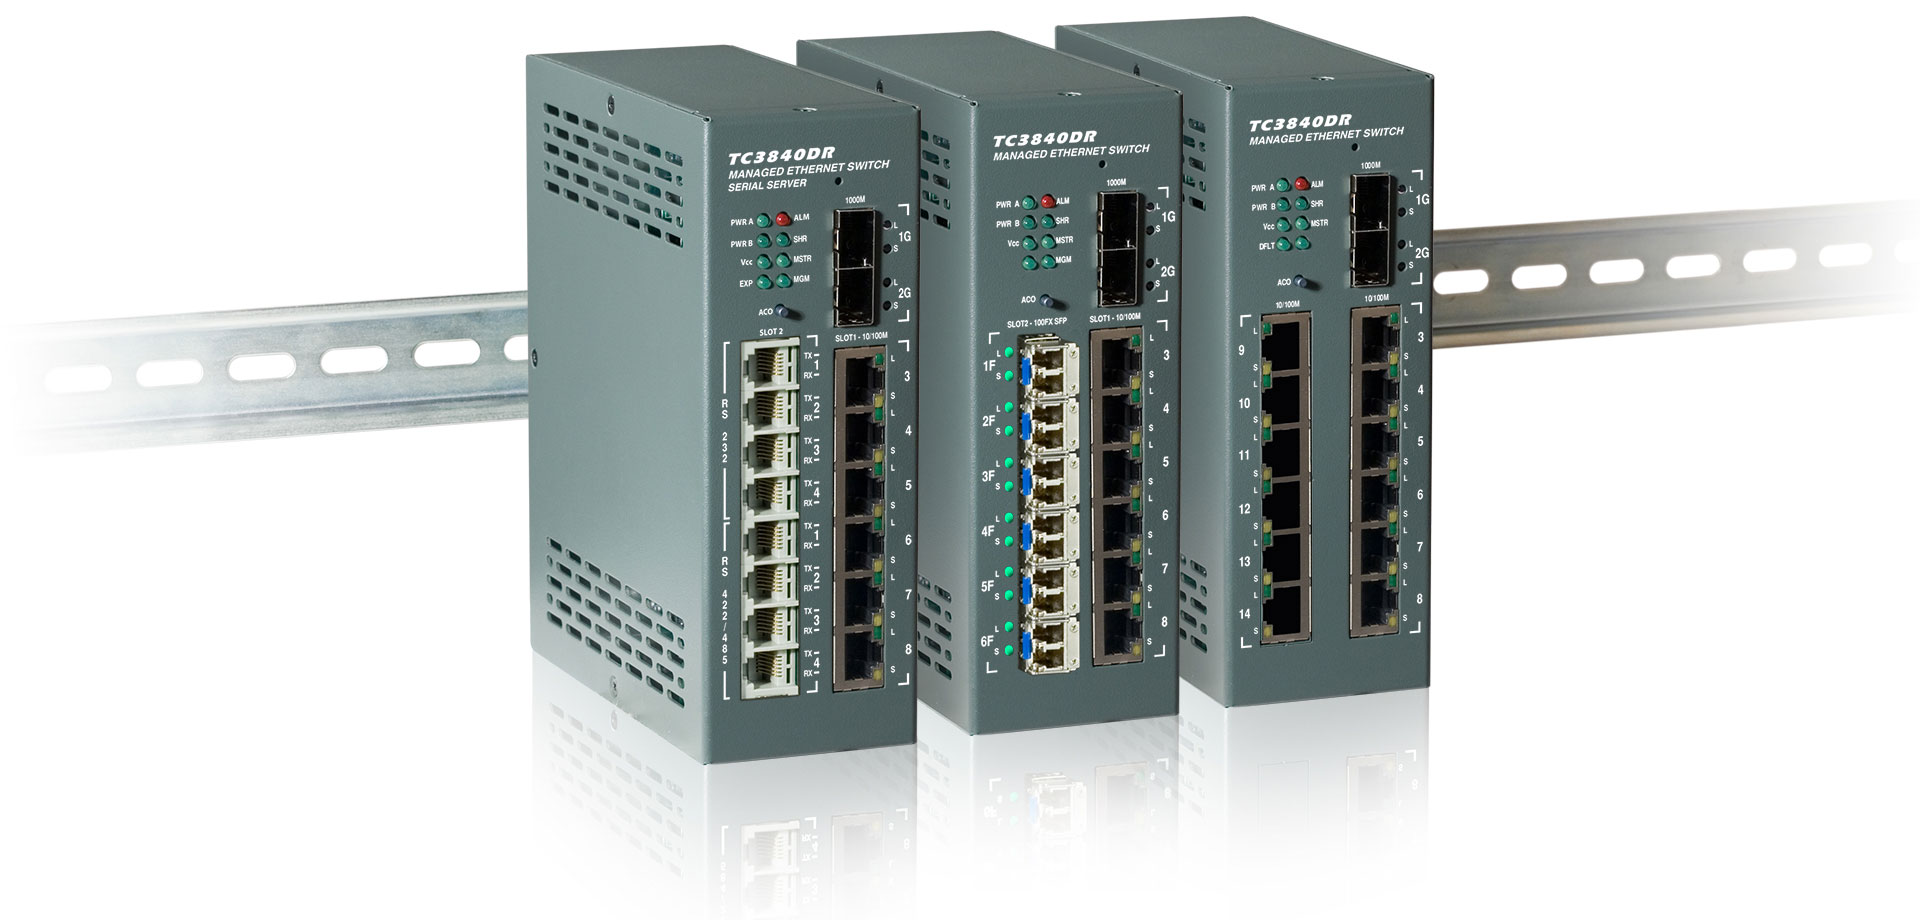 The digitally savvy POE switch that is reliable and easy to use